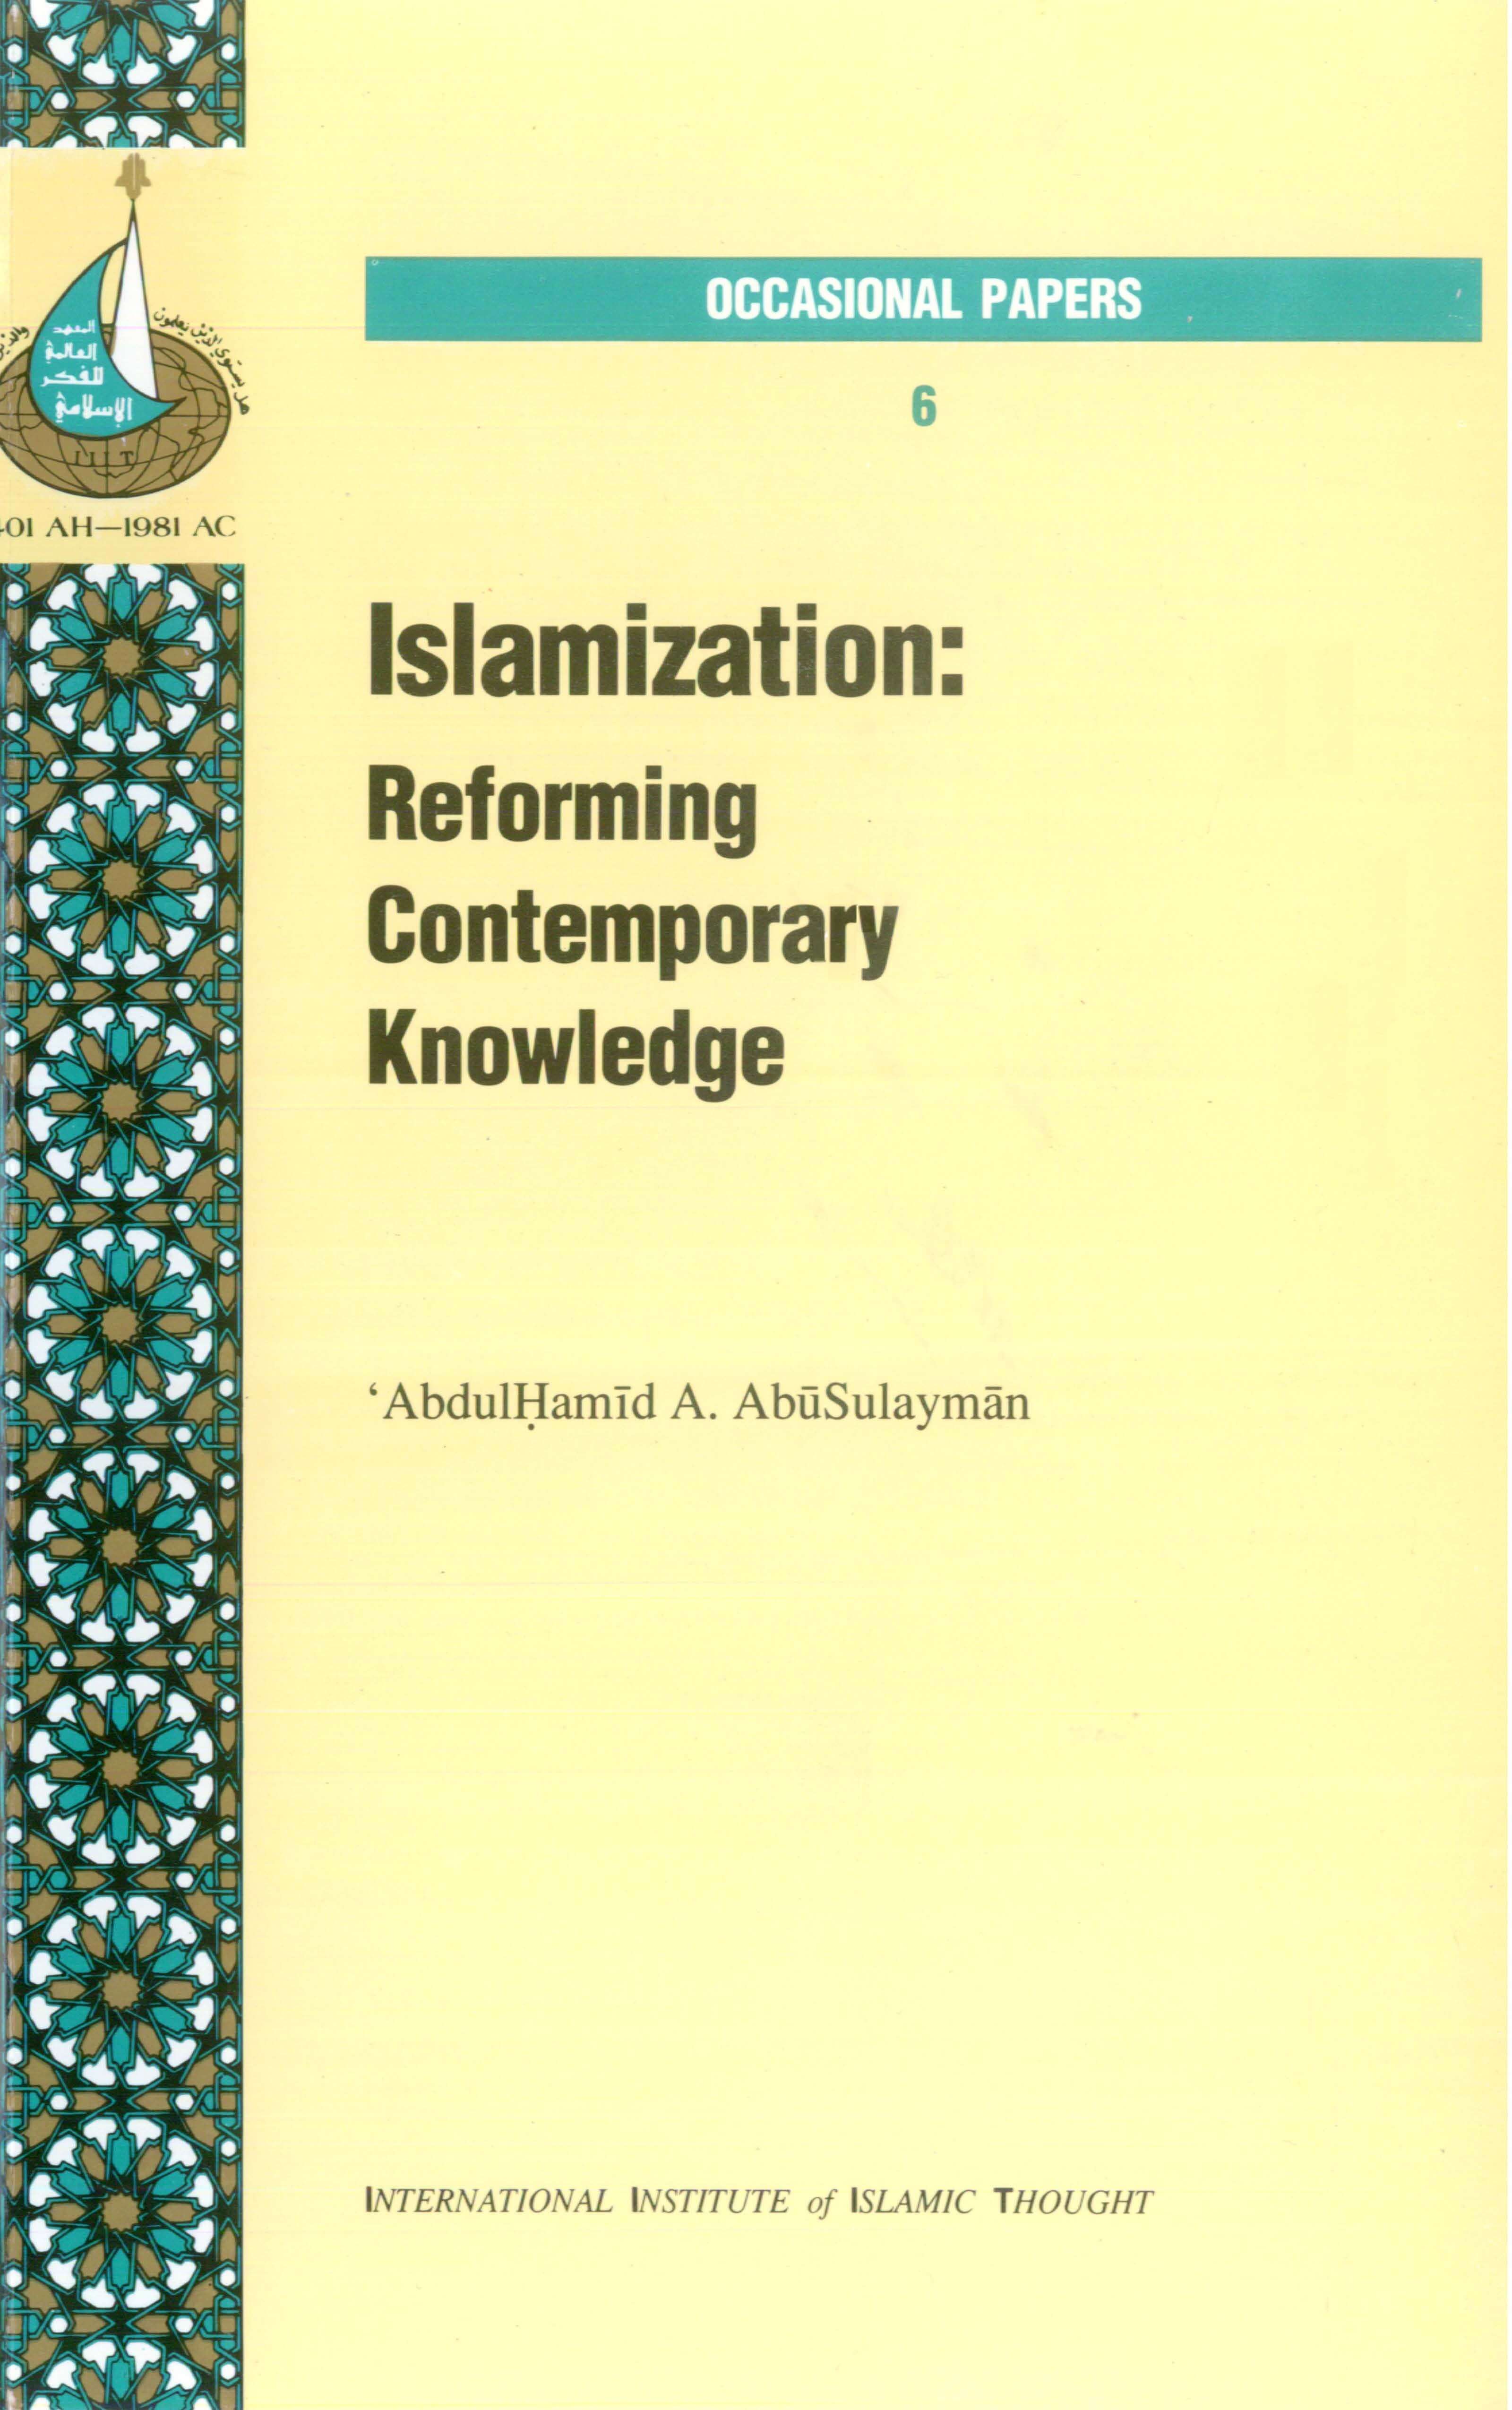 Islamization: Reforming Contemporary Knowledge​